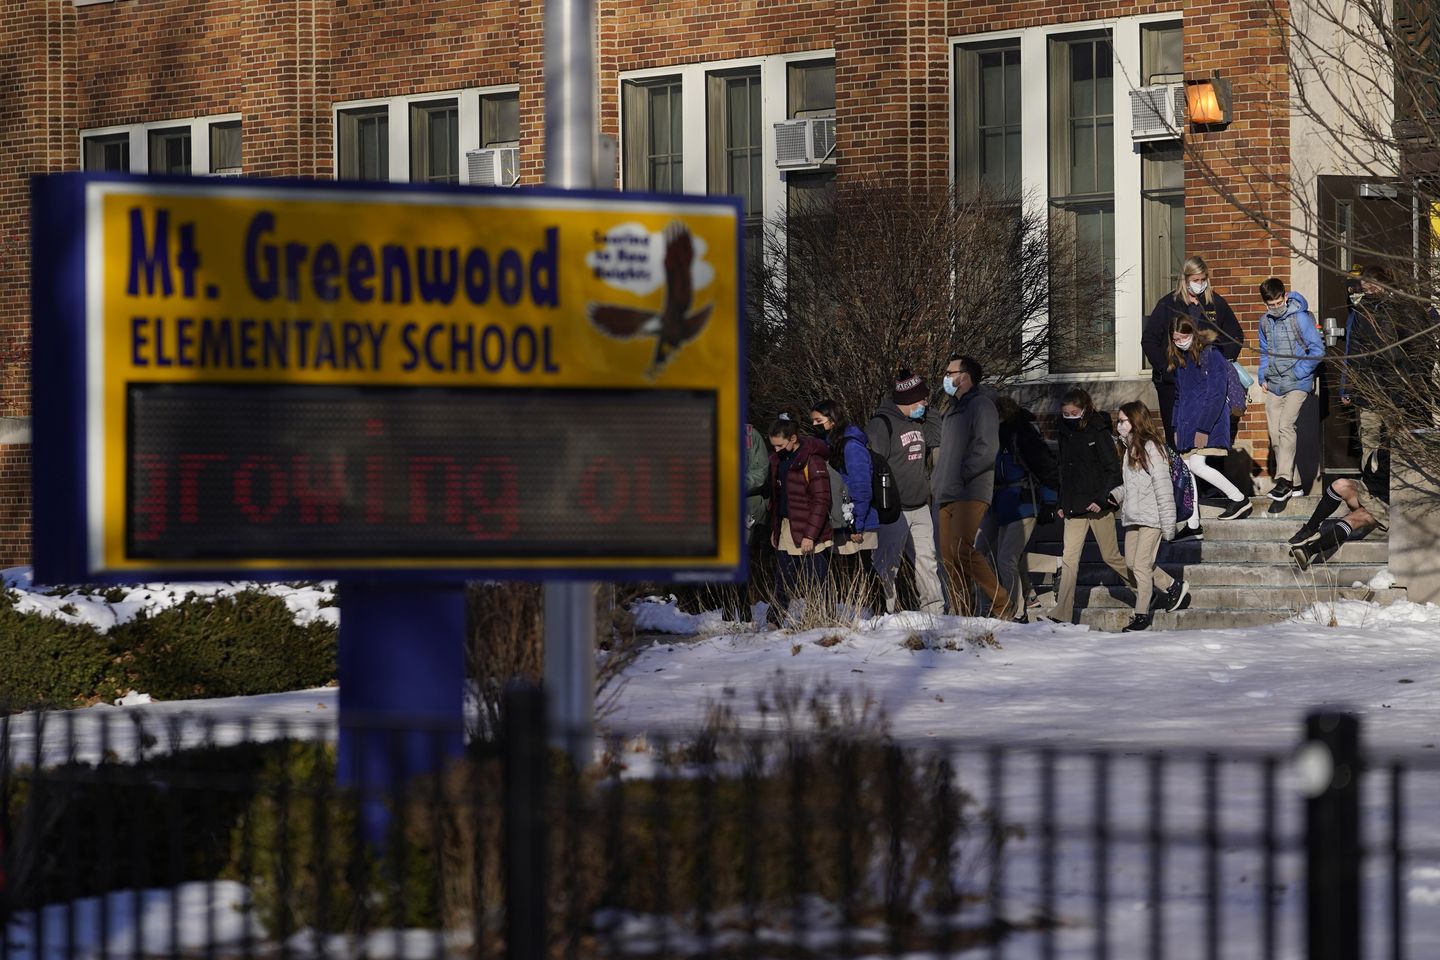 Chicago classrooms to reopen Wednesday after a bitter feud over remote learning in virus surge